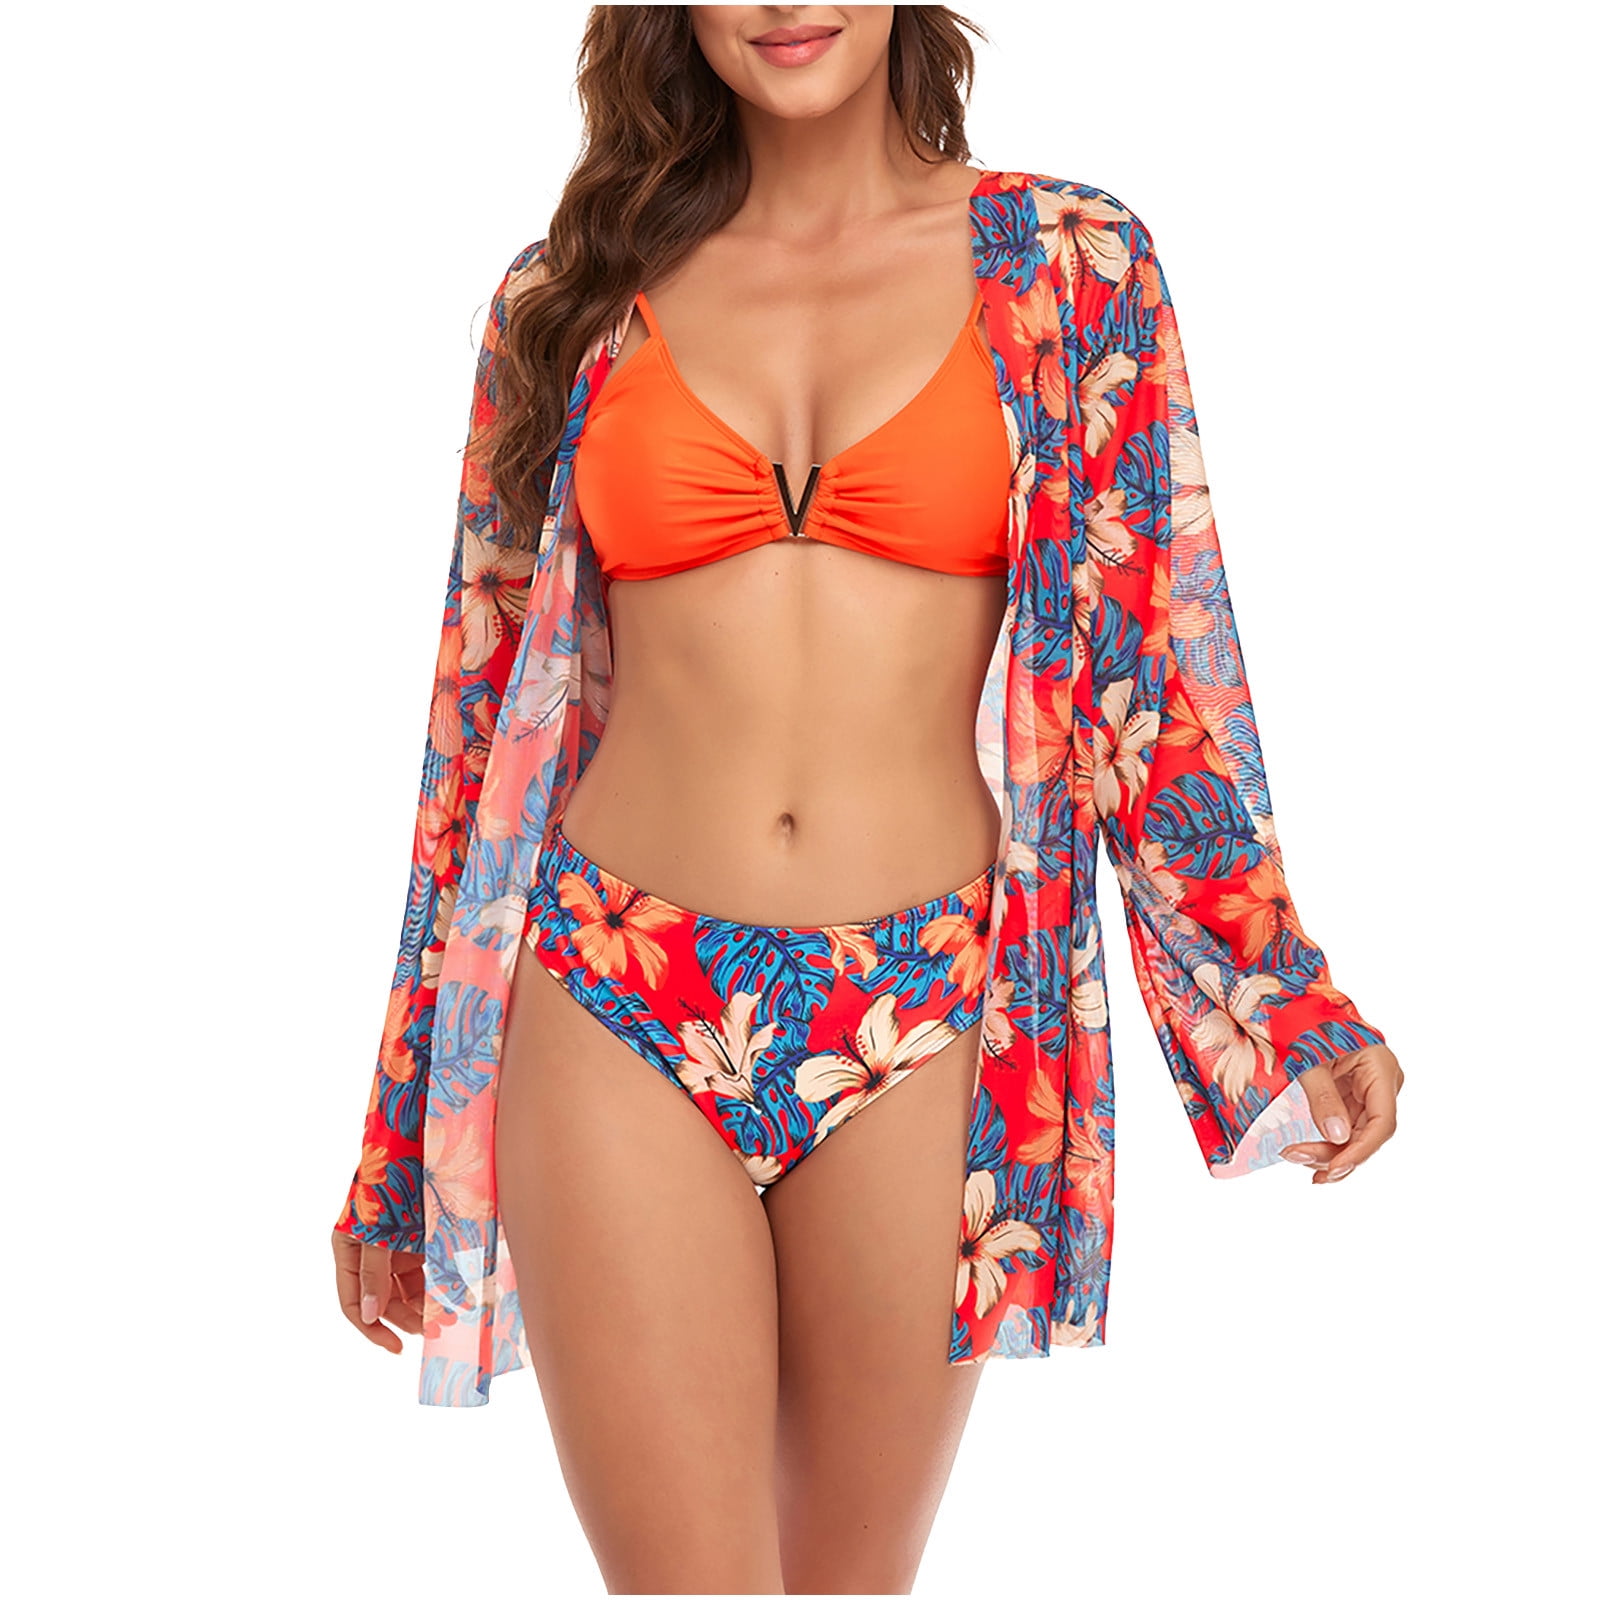 Tummy Control Beachwear Cover Up For Women Perfect For Rompers, Plus Size Swim  Suits, Vacations, Honeymoons, And Cruises From Baizhanji, $18.9